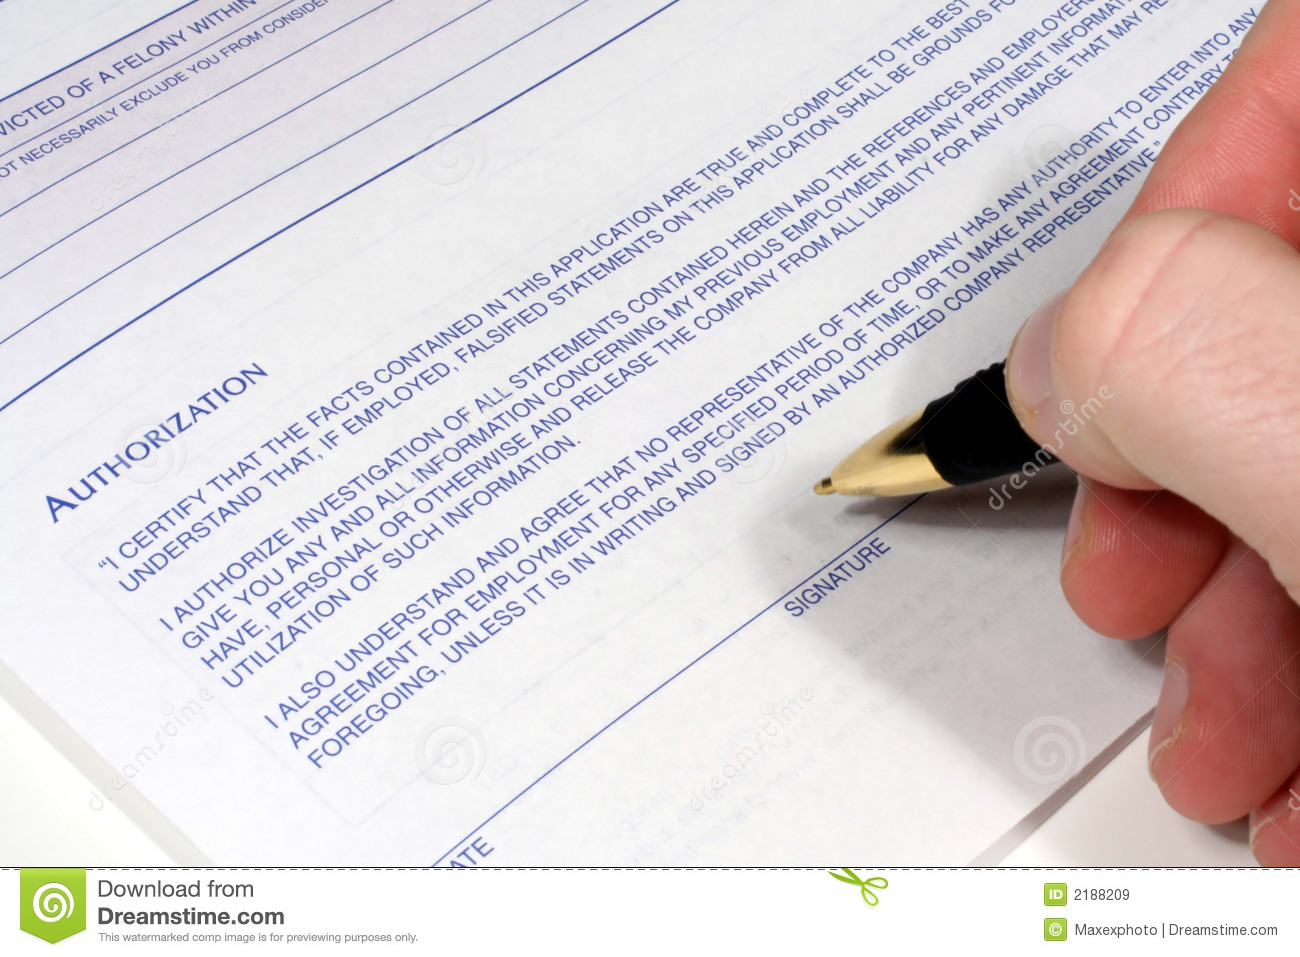 This Is An Image Of A Hand With A Pen Signing An Authroization Form